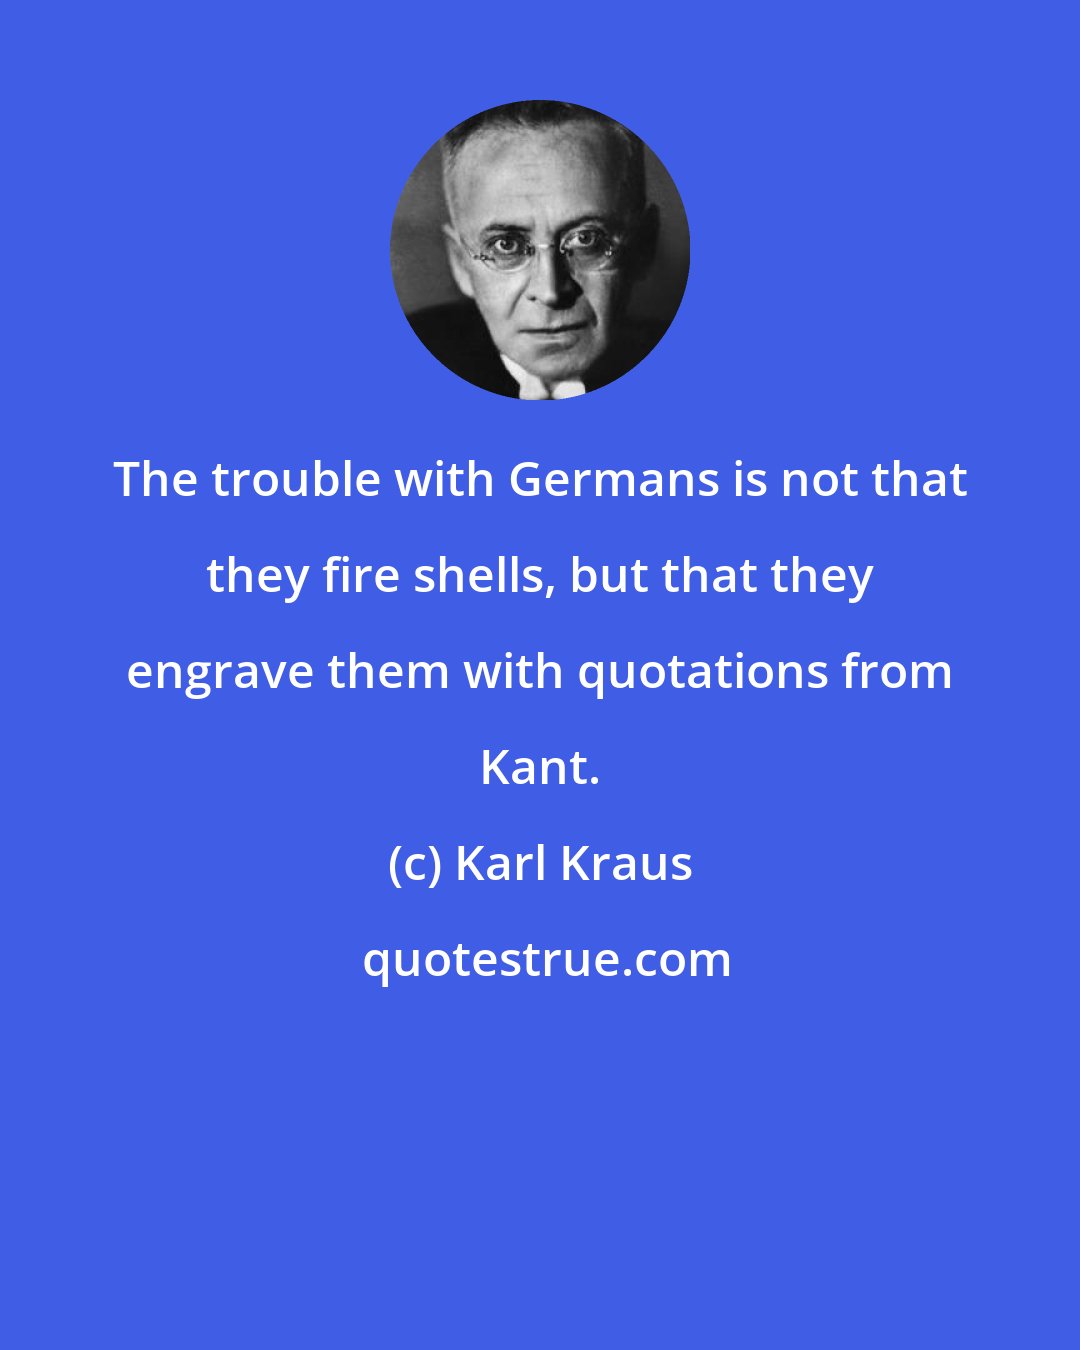 Karl Kraus: The trouble with Germans is not that they fire shells, but that they engrave them with quotations from Kant.